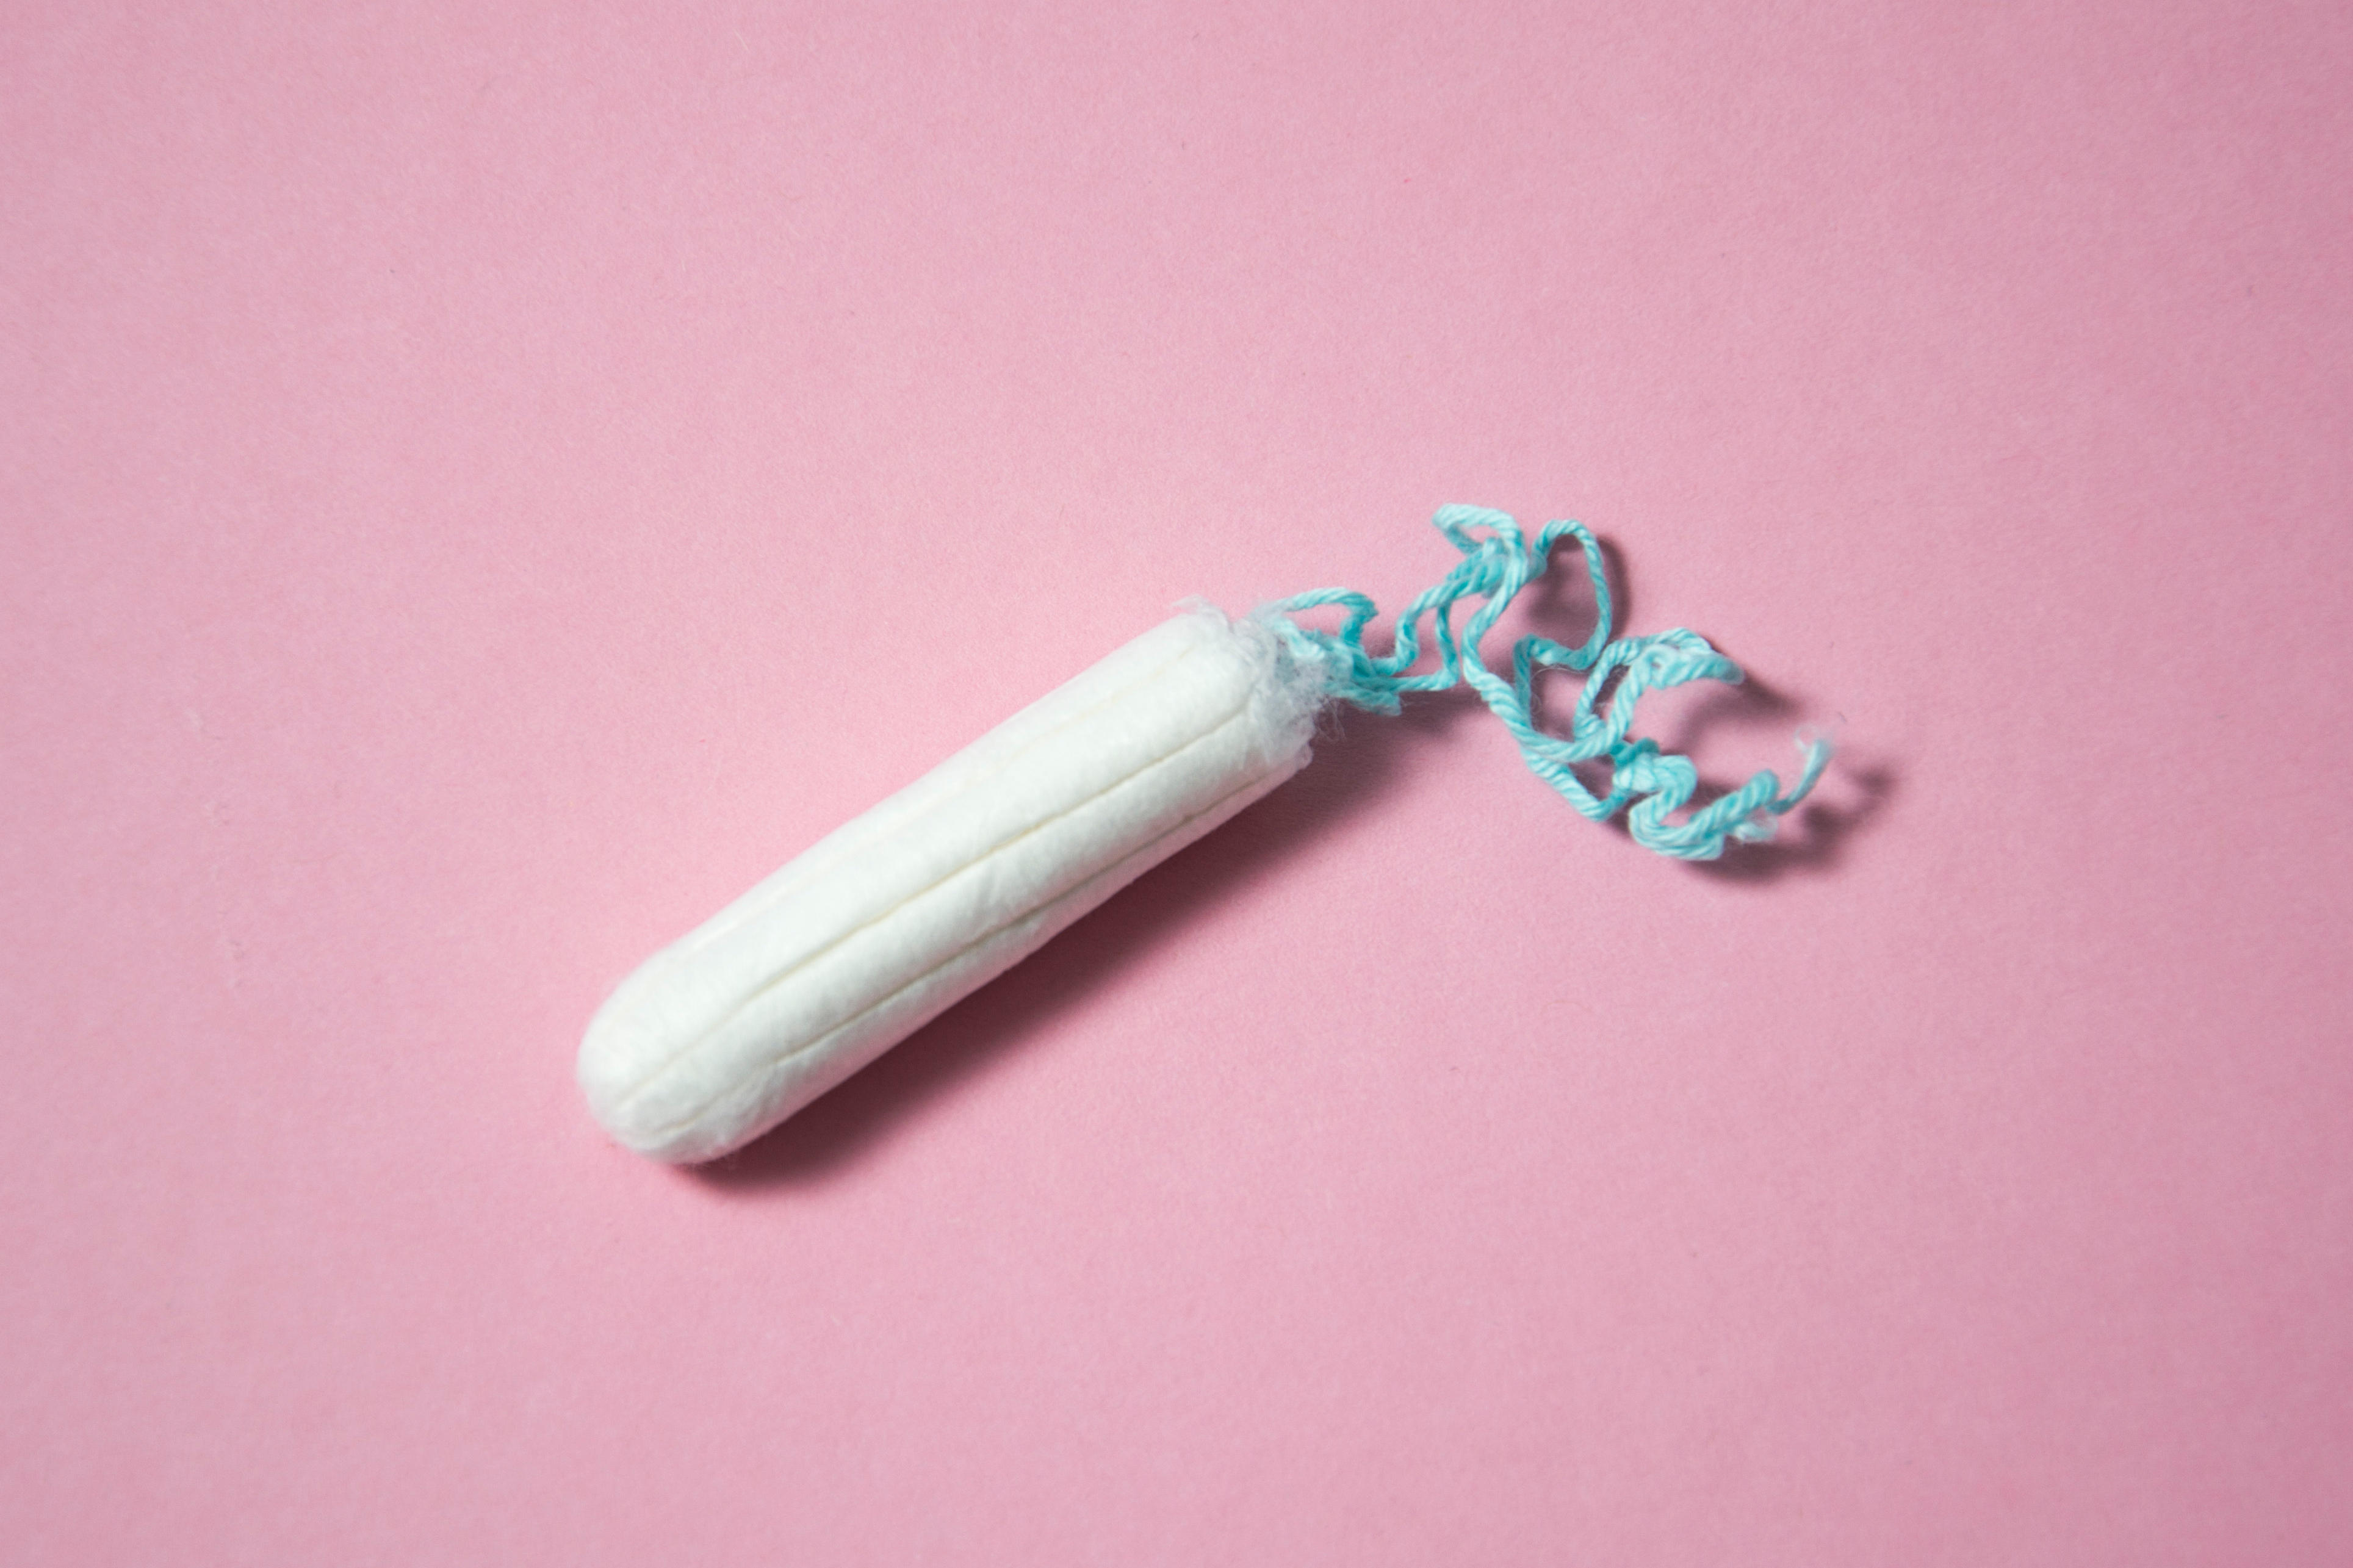 Combined, women spend more than four years of their lives experiencing menstruation.